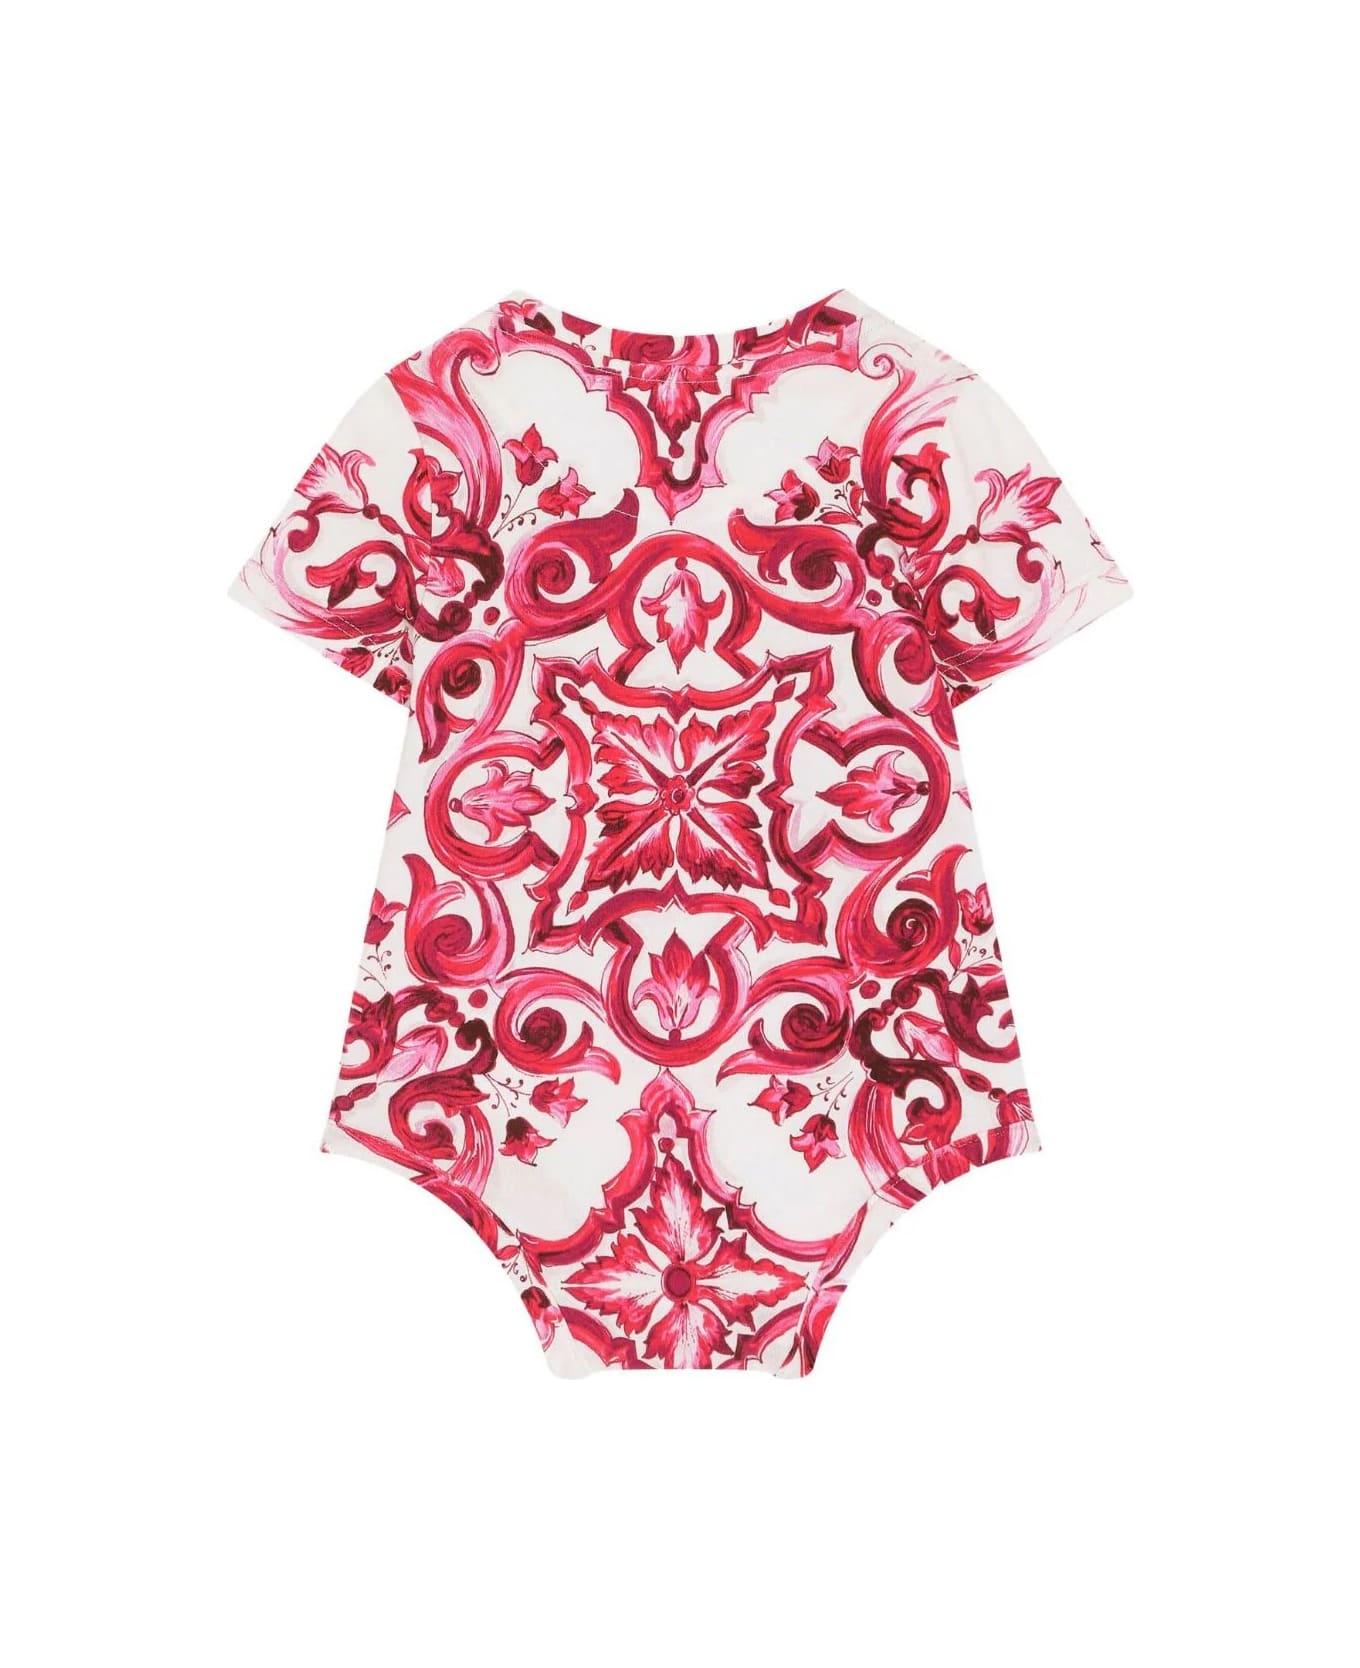 Dolce & Gabbana Set 2 Bodies In White And Fuchsia With Dg Logo And Majolica Print - Pink